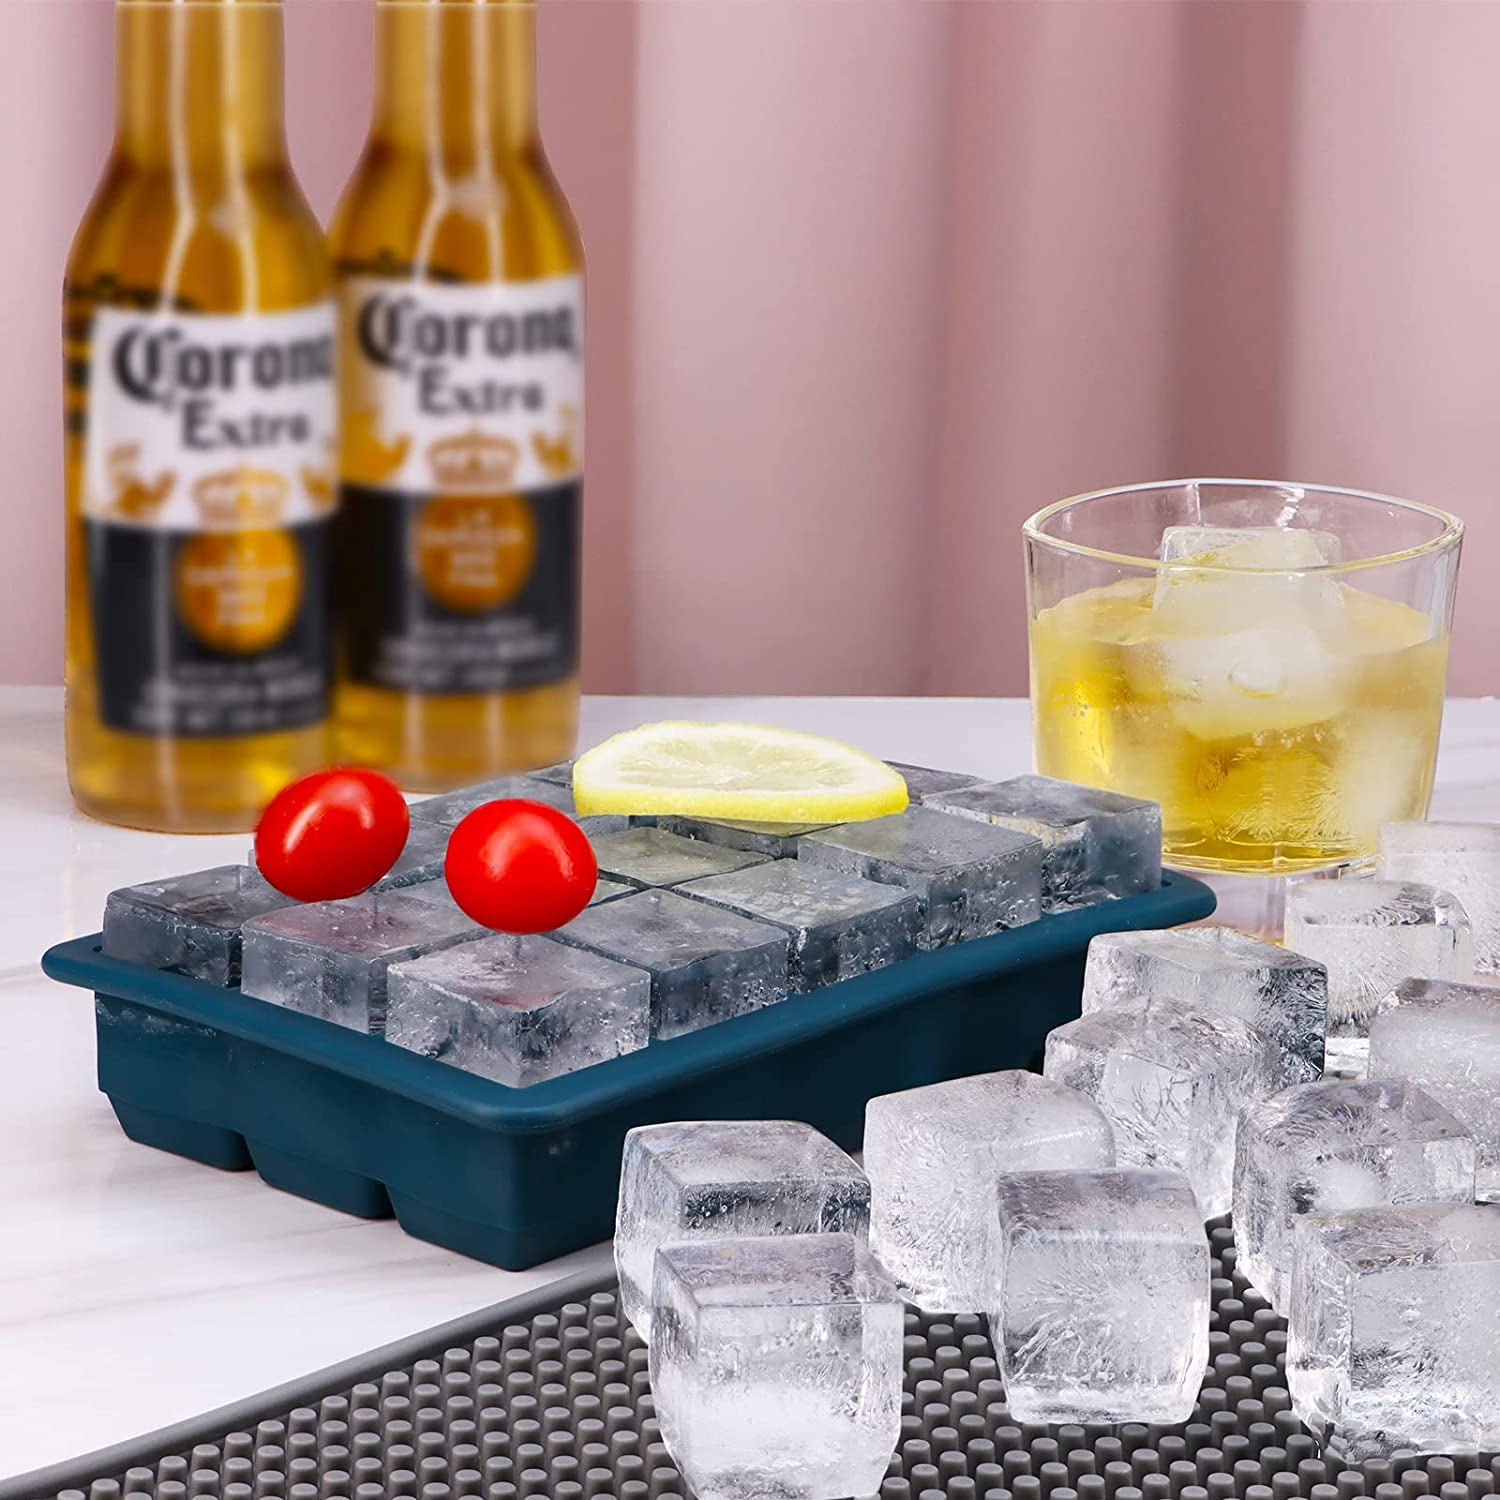 AYI&AYEE Silicone Ice Cube Trays with Lids - 2 Pack - 15 Cavities 1 2/5  inch (2 tbsp / 30ml / 1 fl oz) Square Ice Cubes Baking Molds - BPA free -  Easy